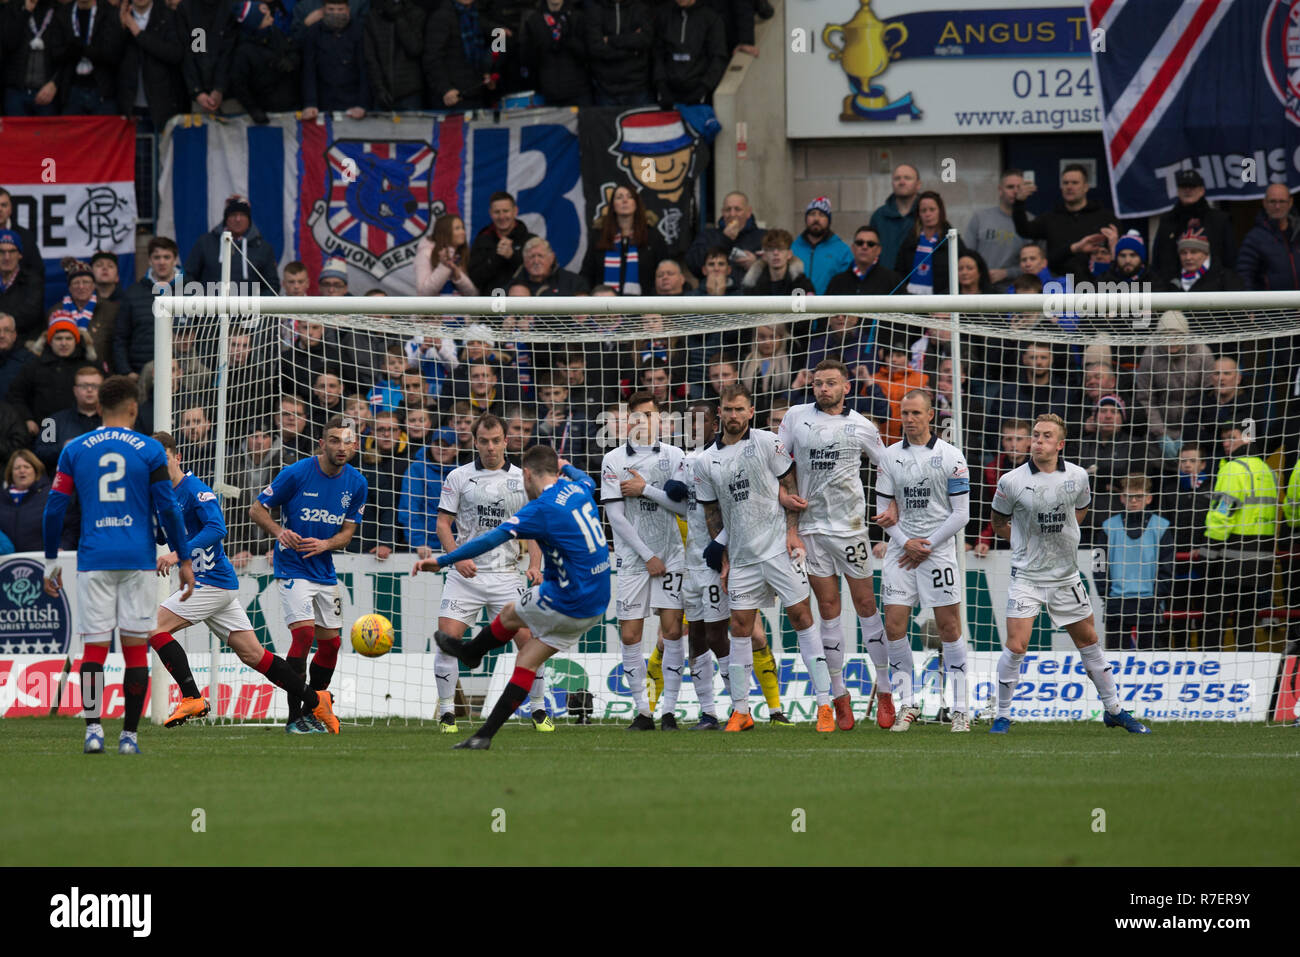 Dens Park, Dundee, Scotland, UK. 9th December, 2018. Ladbrokes Premiership  football, Dundee versus Rangers; Andrew Halliday of Rangers scores from a  direct free kick for 1-1 in the 20th minuteEditorial use only,